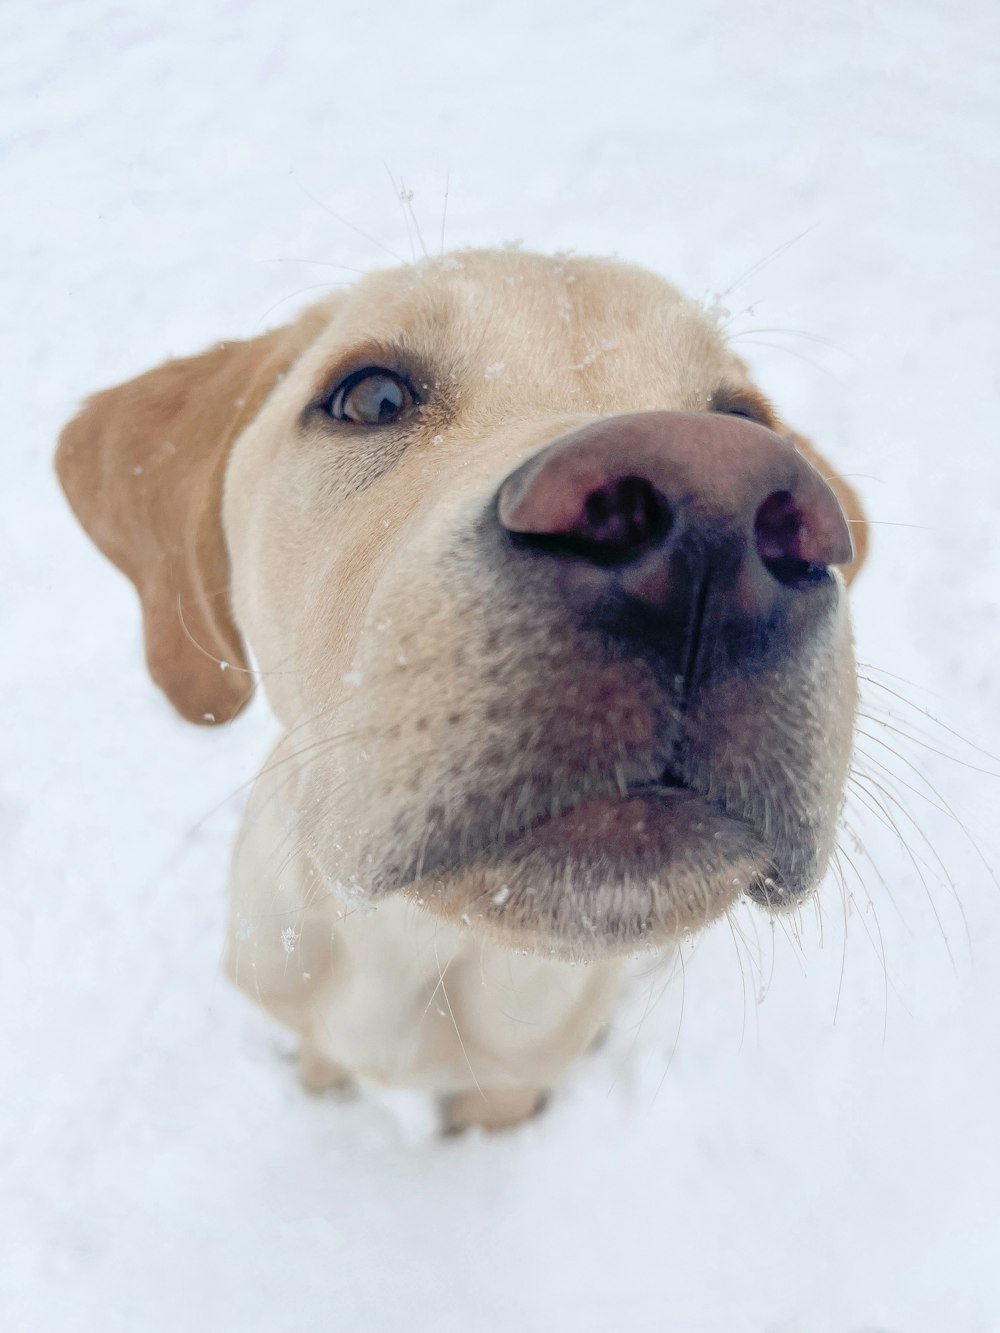 a close up of a dog's face in the snow